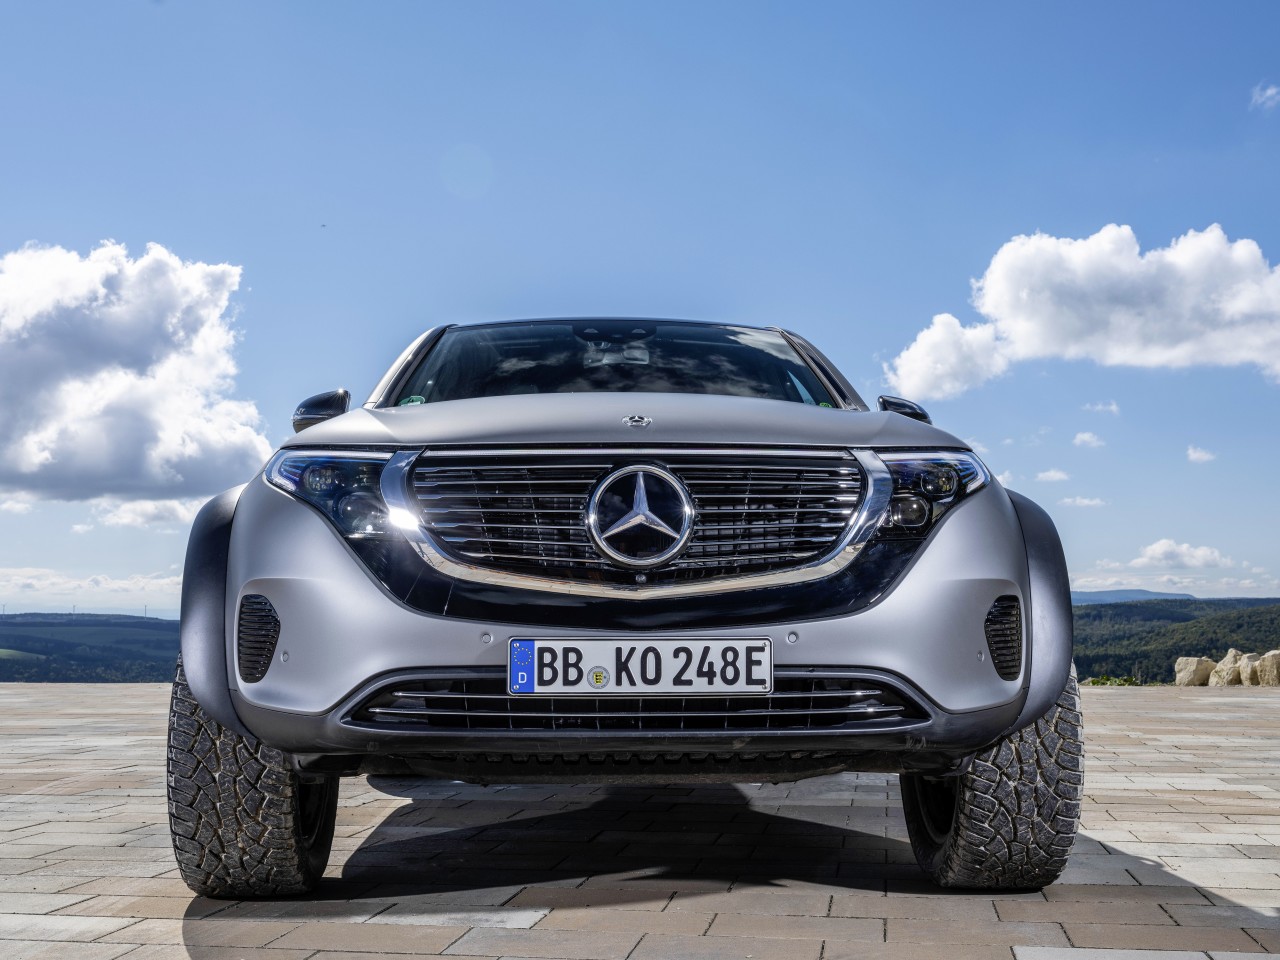 Portal axles and fender flares give the Mercedes EQC 4x4² a presence like no other electric crossover